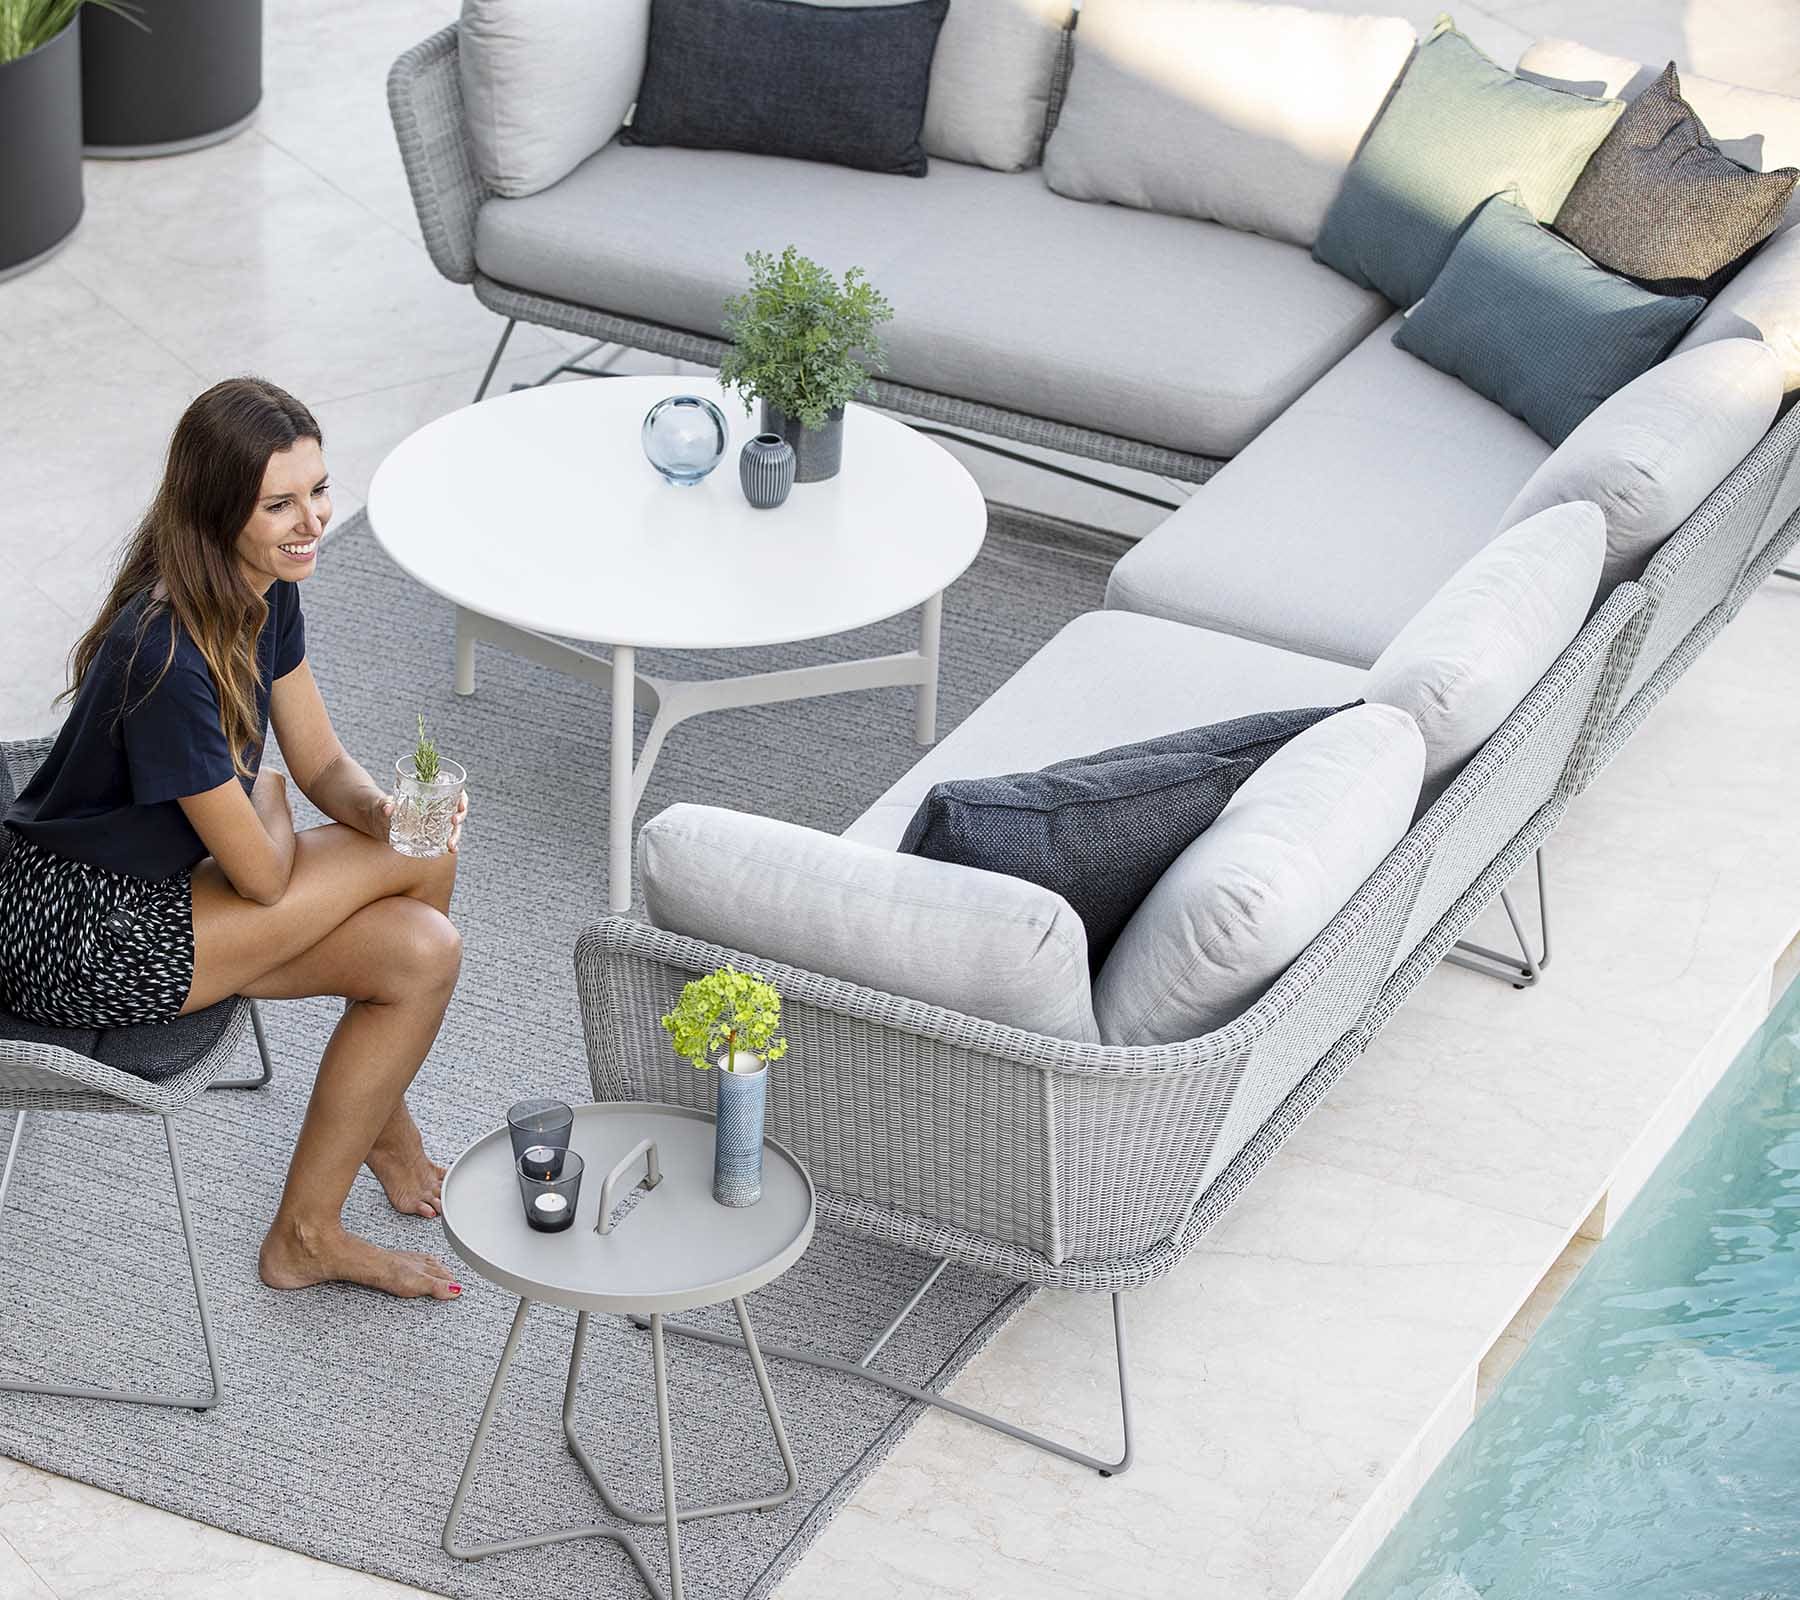 Boxhill's Horizon 2-Seater Outdoor Right Module Sofa lifestyle image together with Horizon 2-Seater Outdoor Left Module Sofa at poolside with a woman sitting down holding a glass of water